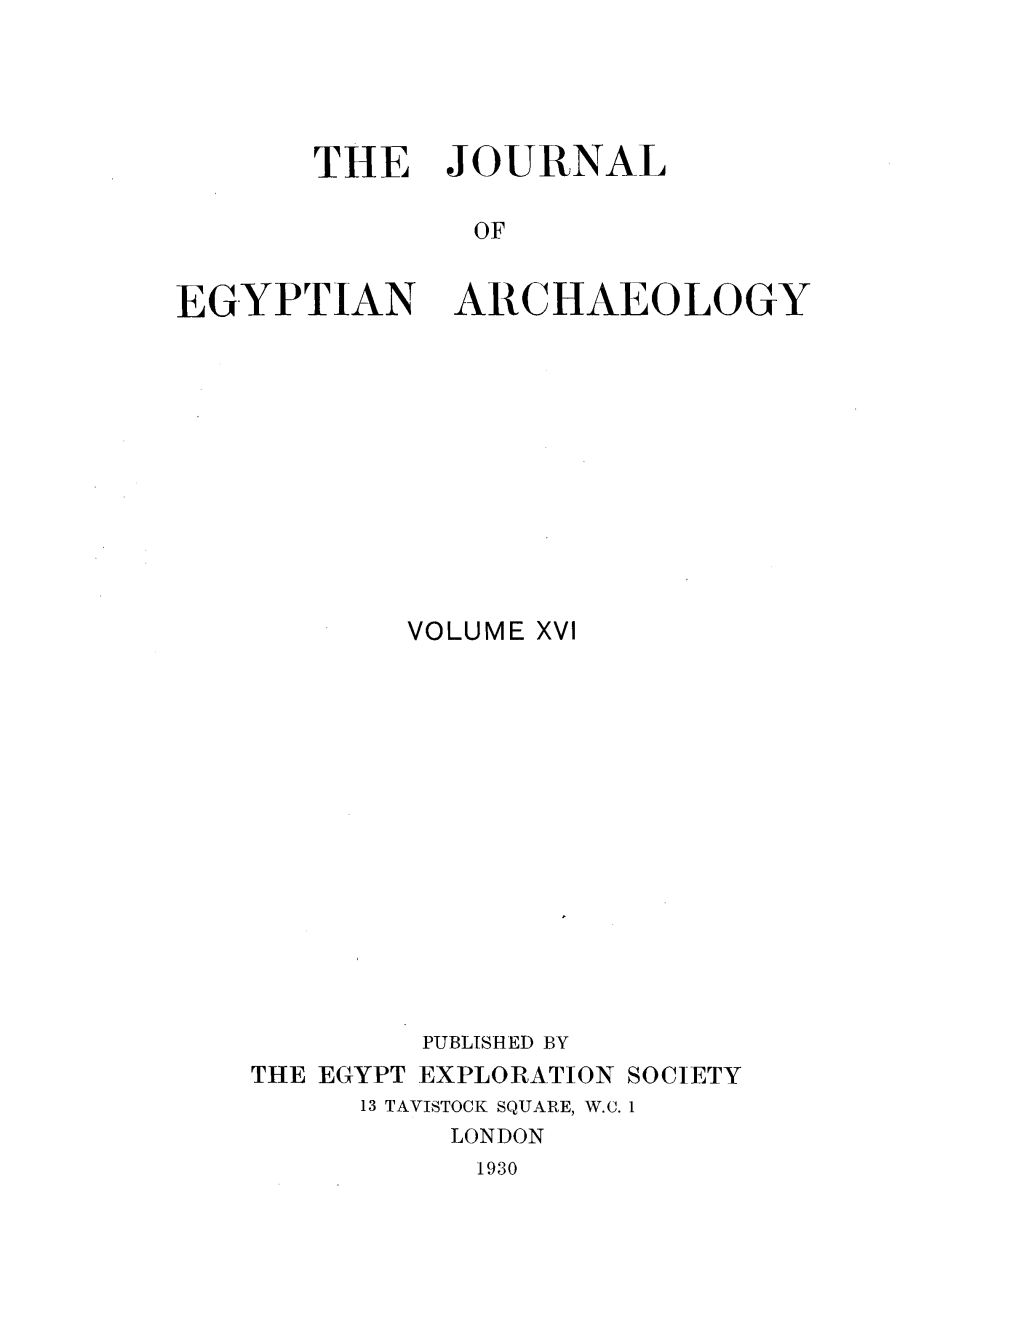 Journal of Egyptian Archaeology 16 (1930)